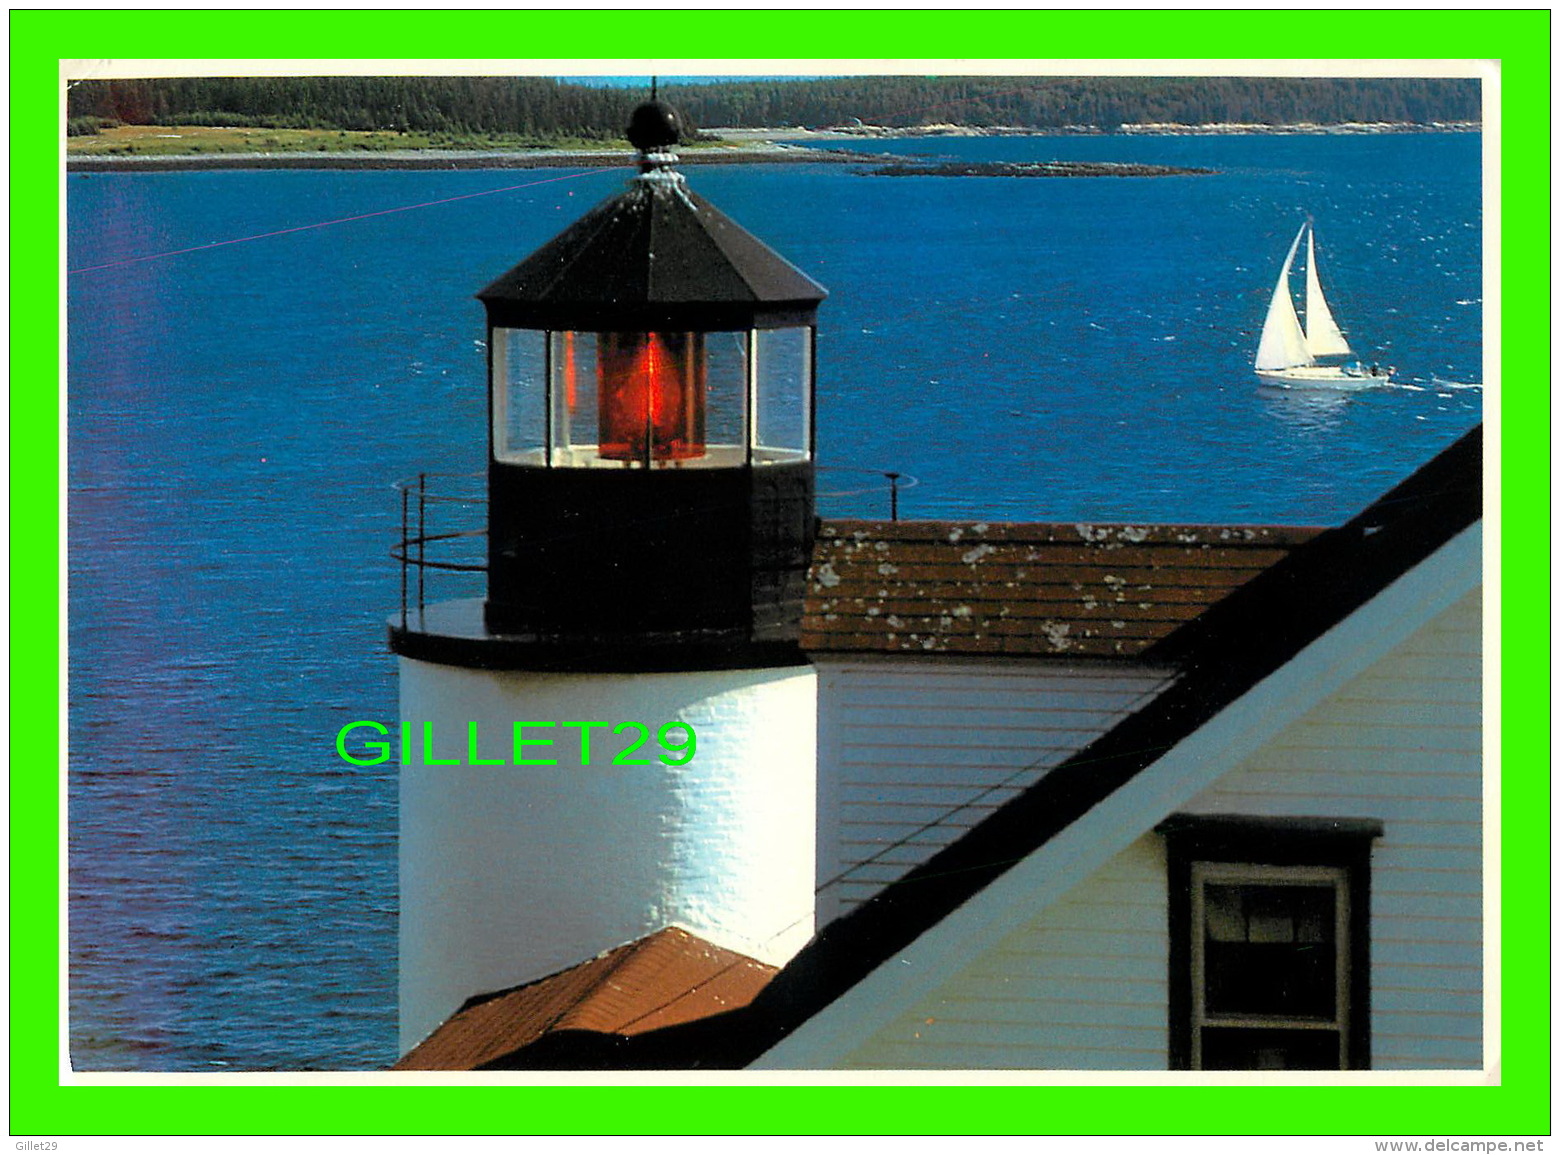 PHARES - LIGHTHOUSES - BASS HARBOR LIGHT, MAINE - TRAVEL IN 1986 - THE ACADIA SCHOOL OF PHOTOGRAPHY - - Phares